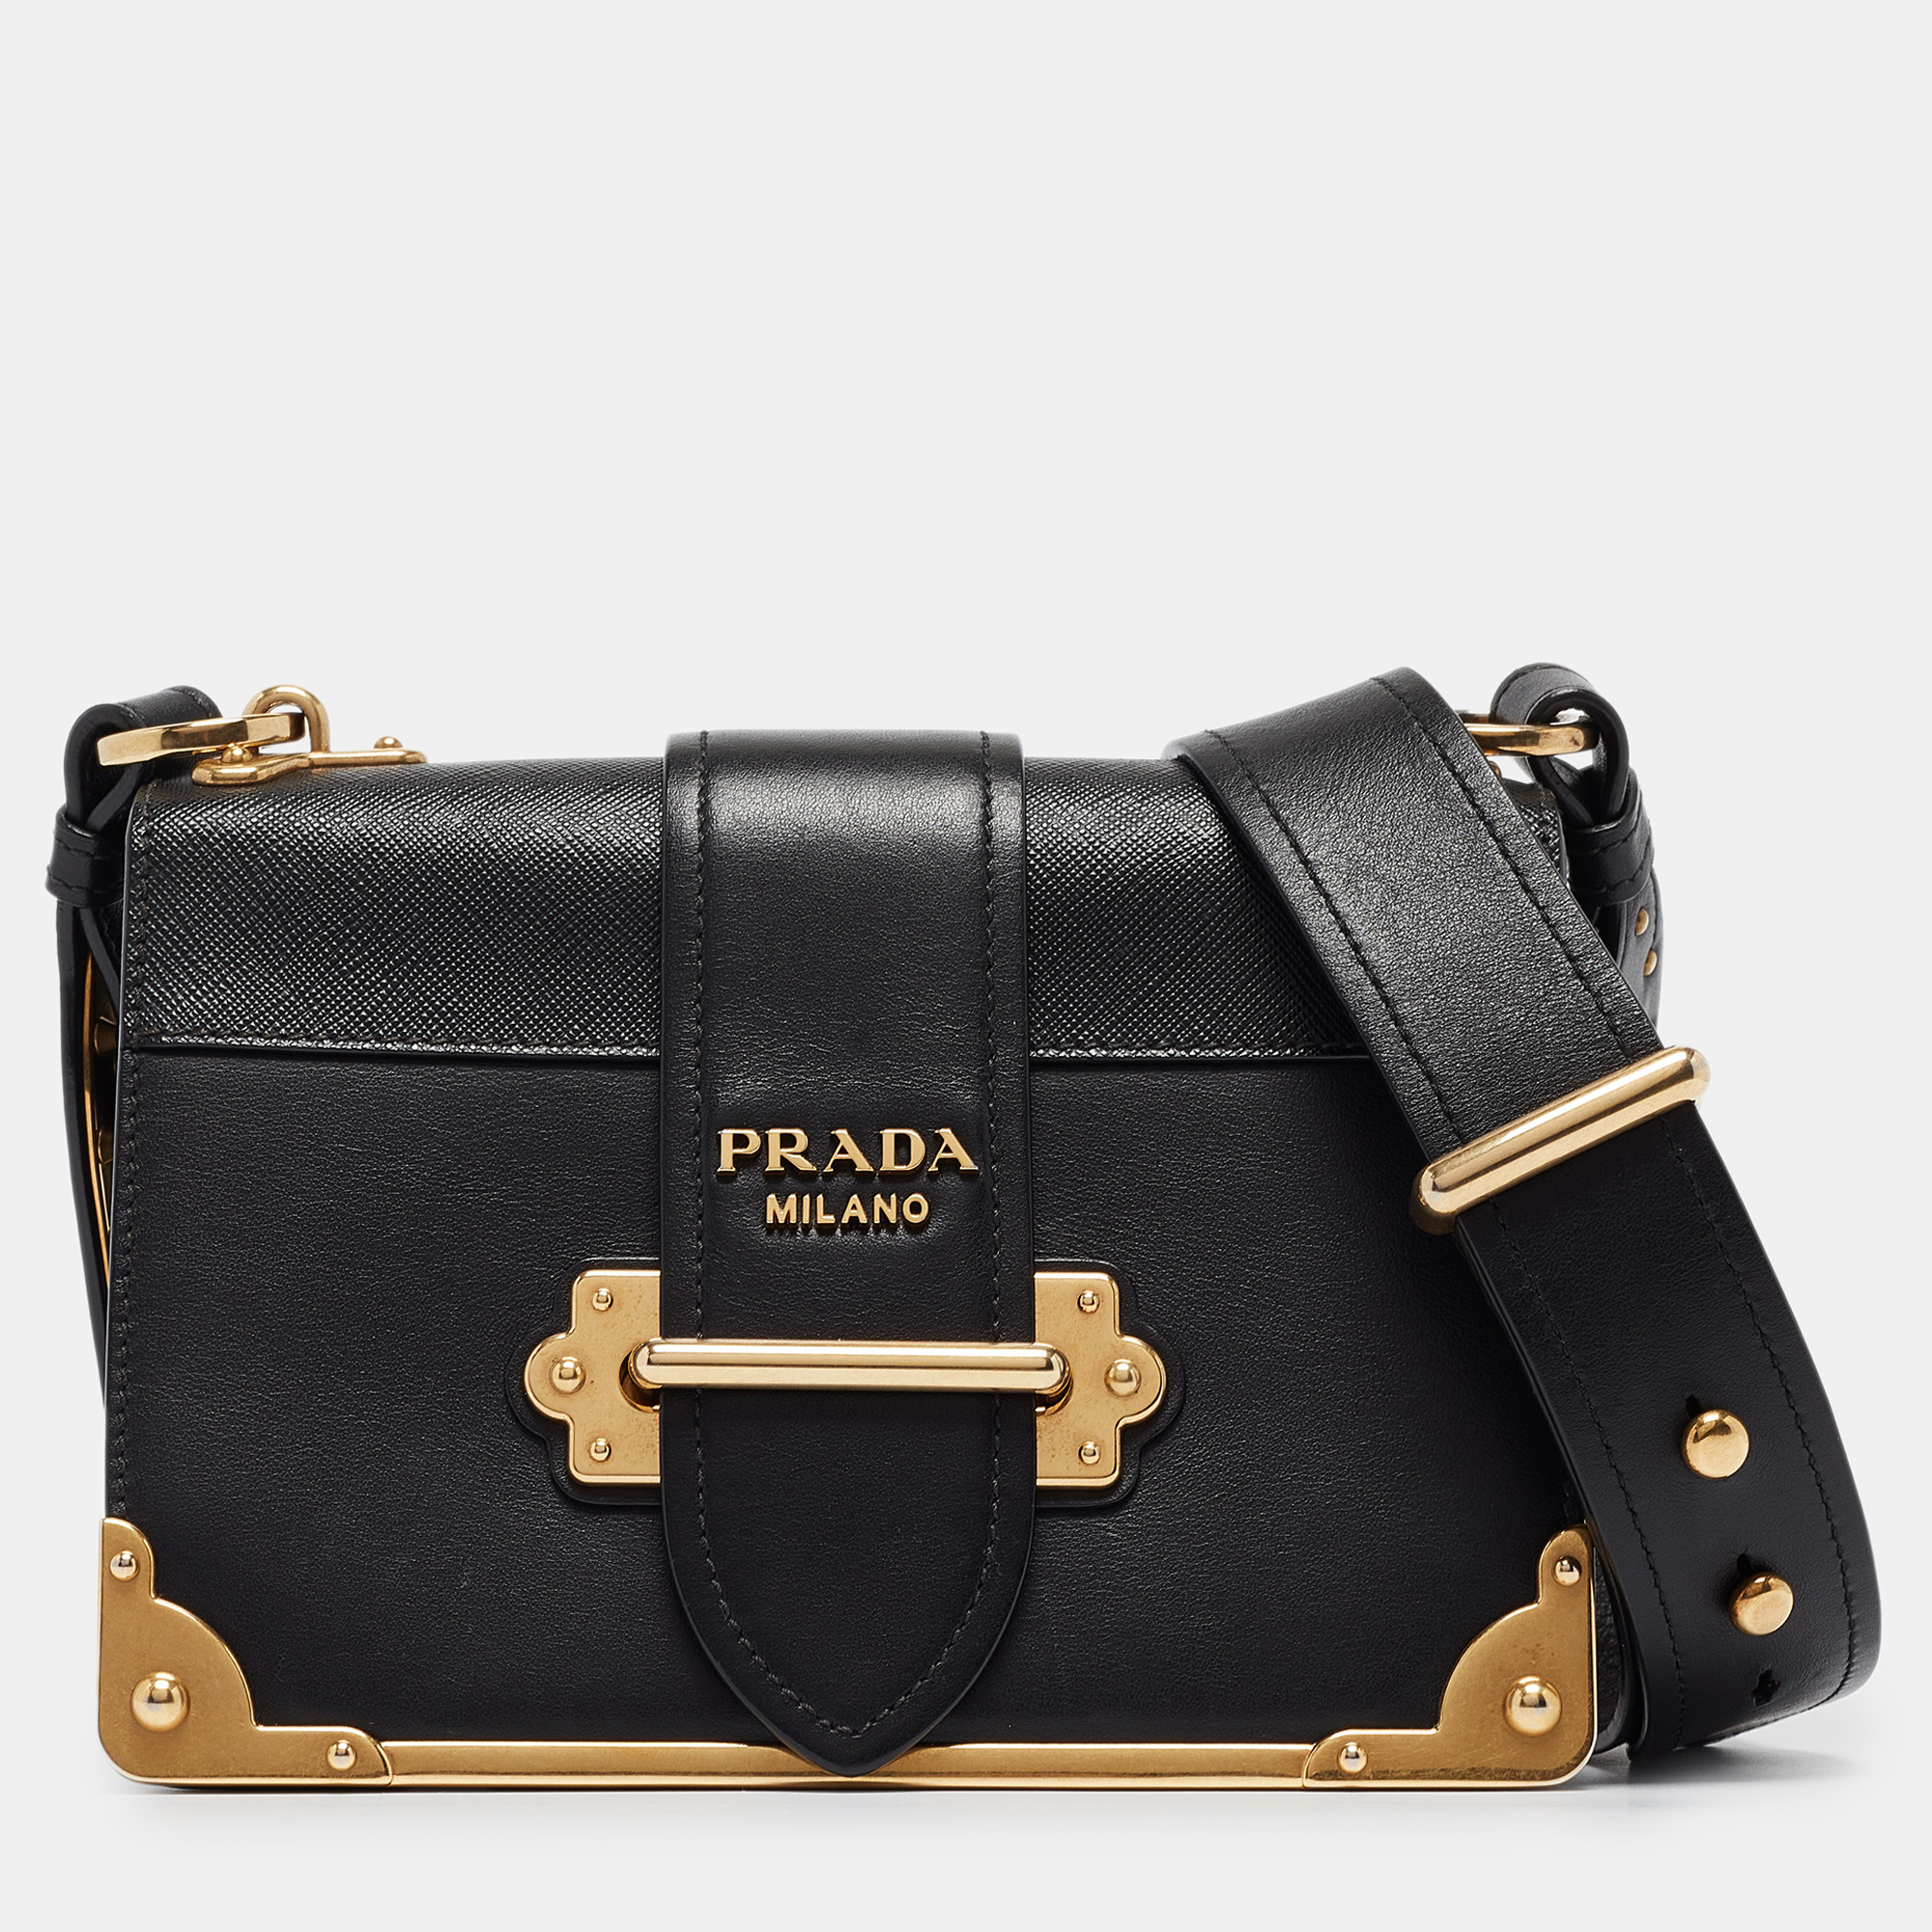 Impeccably designed in Lux leather this Cahier bag by Prada is the perfect one for the modern fashionista. Lined with fine leather this black hued bag delivers trendy looks as well as functionality. It is adorned with gold tone accents and a tuck in strap closure. The long shoulder strap enhances its functionality.